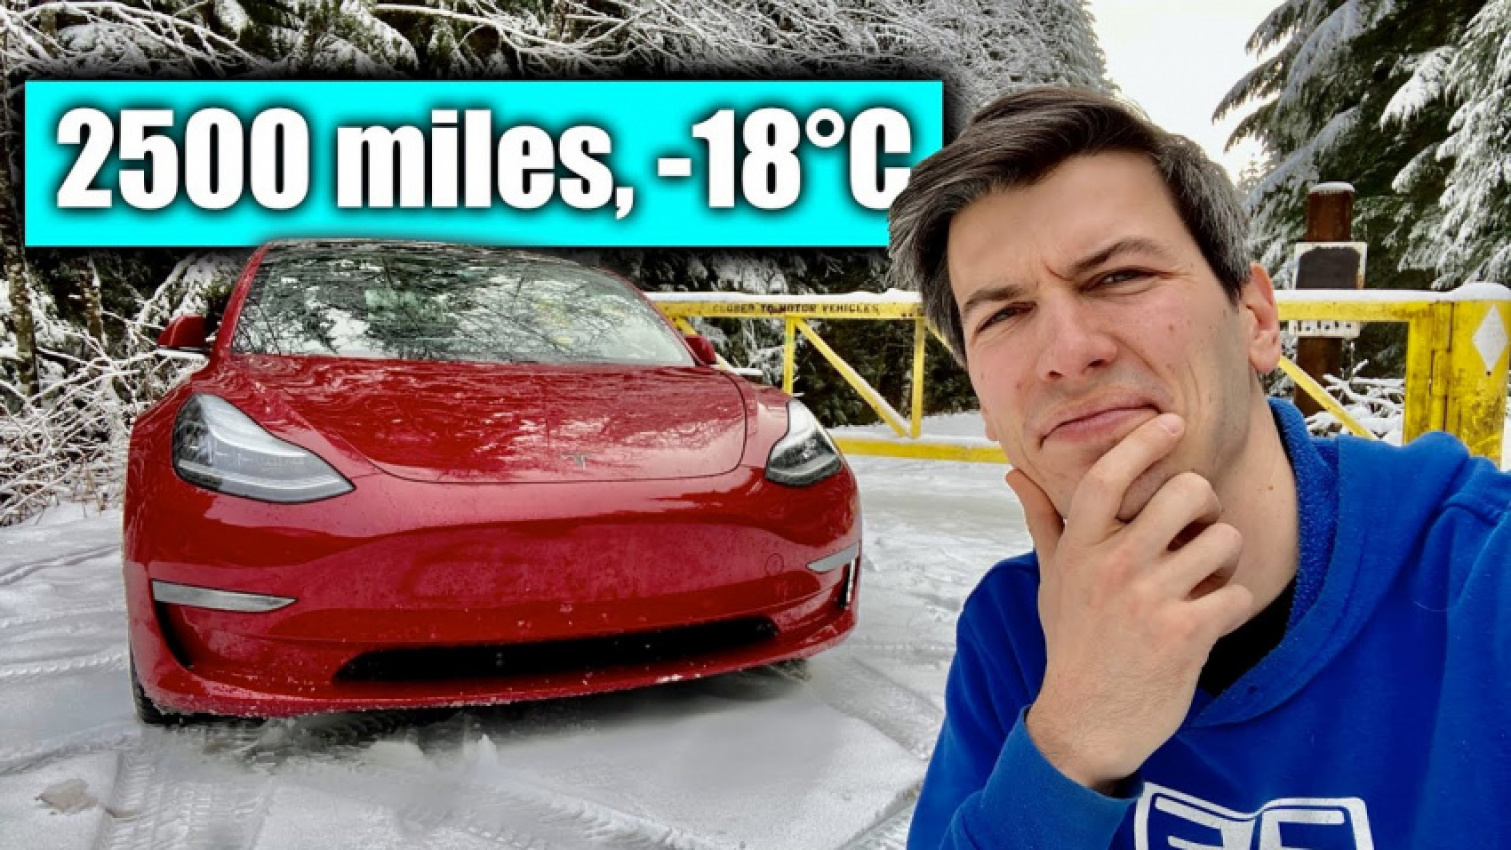 autos, cars, tesla, amazon, below freezing, chevy bolt, cold temperatures, electric car road trip, engineering explained, ev winter road trip, gas car vs electric car, gasoline versus electric, how it works, range anxiety, road trip, supercharger, tesla charging, tesla model 3, tesla model s, tesla model x, tesla pickup, tesla reliability rating, tesla road trip, tesla roadster, tesla supercharger, tesla winter road trip, winter road trip, amazon, how miserable is a winter tesla road trip? -18°c & broken superchargers